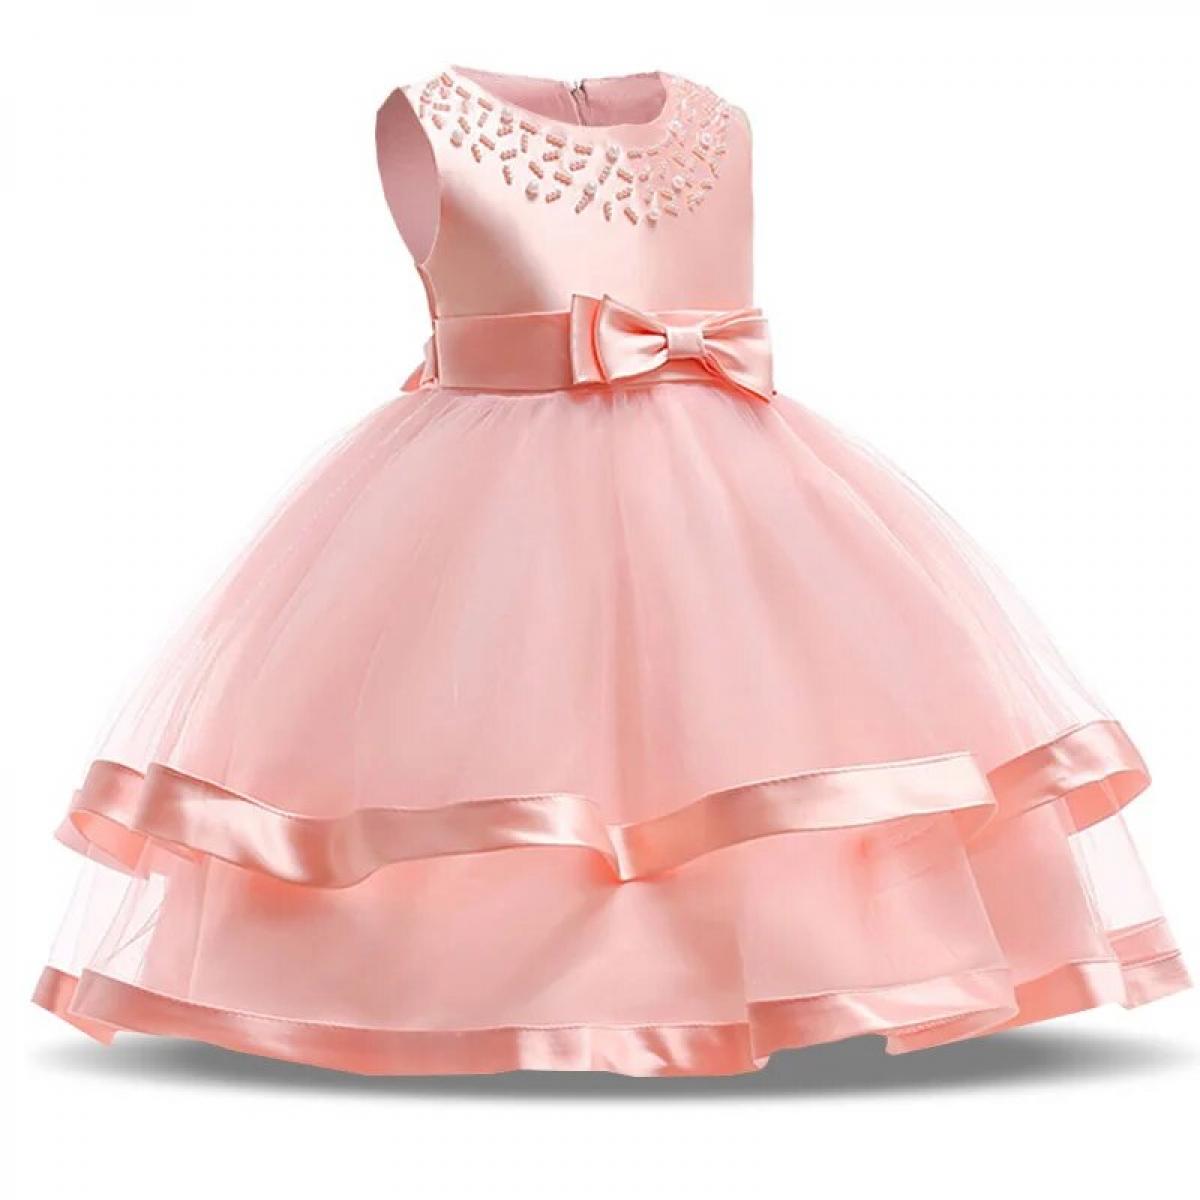 Baby Girl Formal Dress Kids Ceremonies Party Princess Bridesmaid Wedding Beaded Sleeveless For Children Clothes Evening 